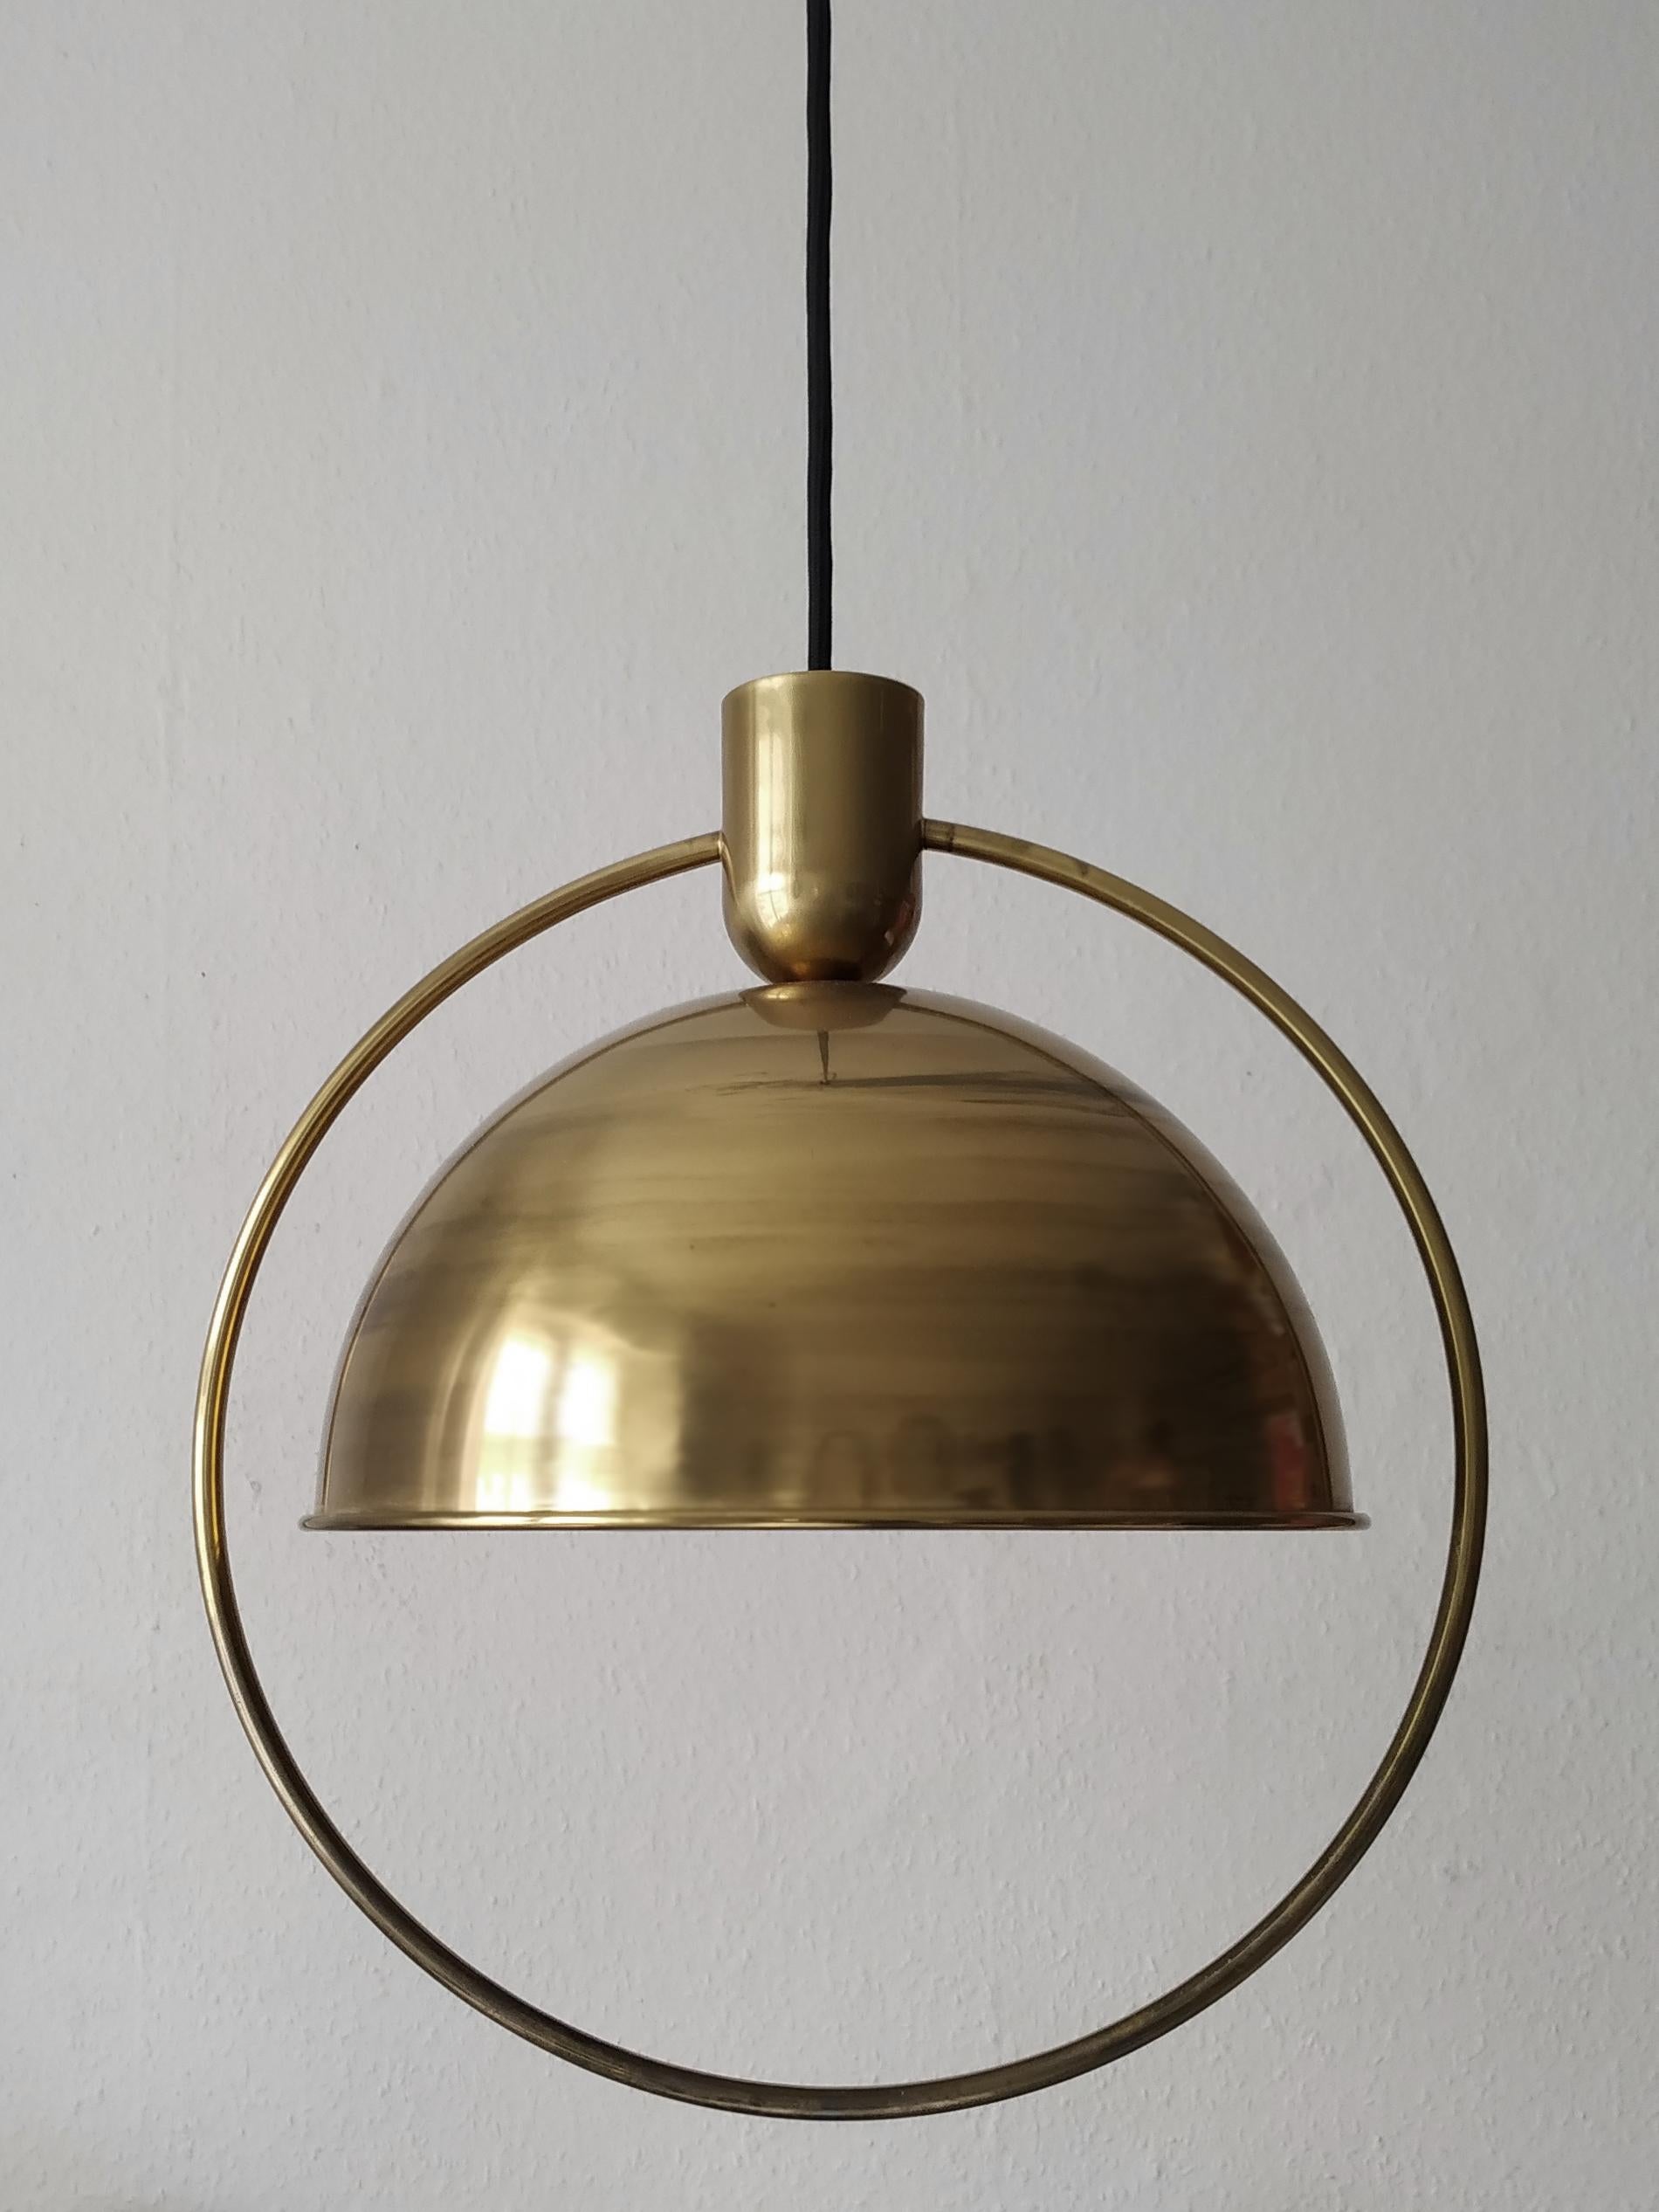 Beautiful adjustable solid brass counterweight pendant light.
Germany, 1960s.
Lamp sockets: One x E27 (US E26)
Measures: Diameter 15